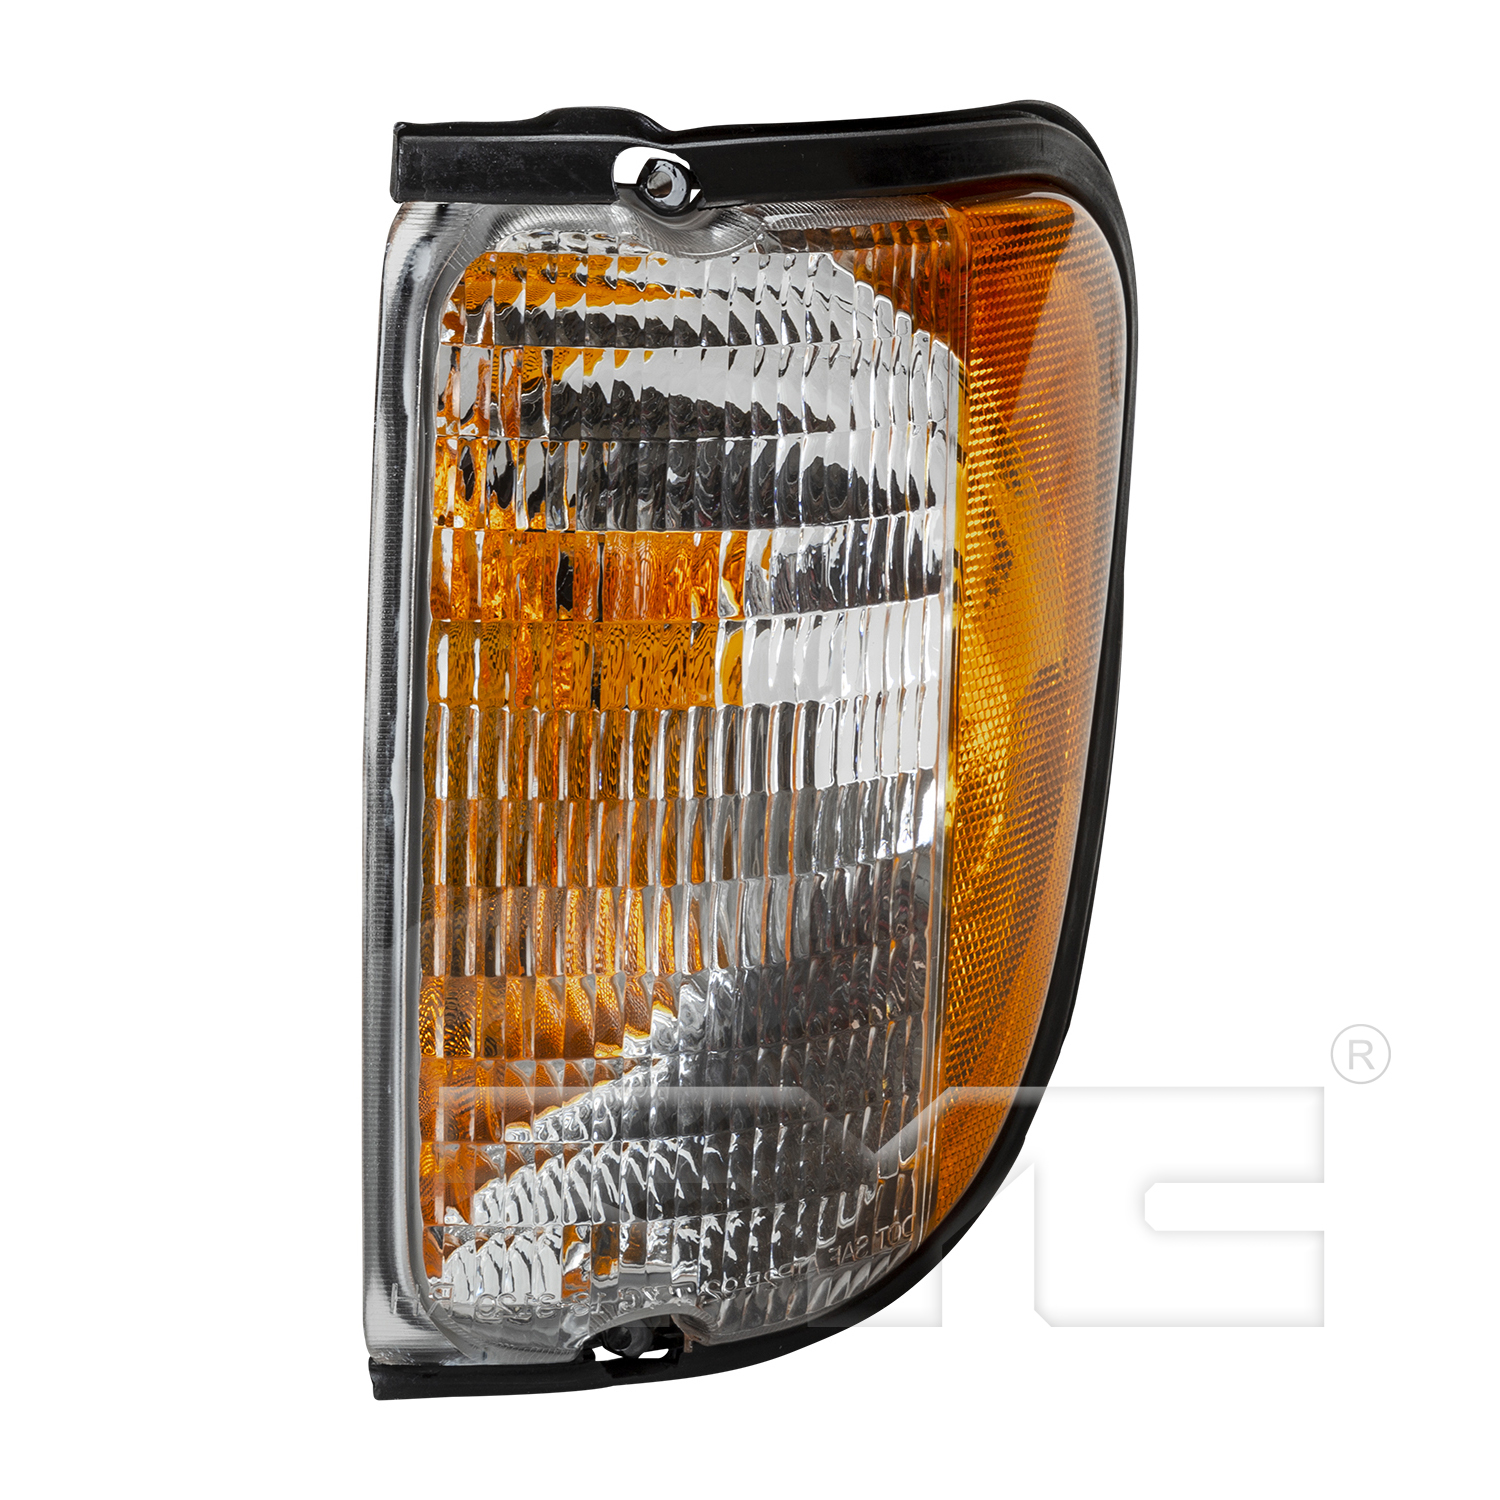 Aftermarket LAMPS for FORD - E-150 ECONOLINE CLUB WAGON, E-150 ECONOLINE CLUB WAGON,92-02,LT Parklamp assy